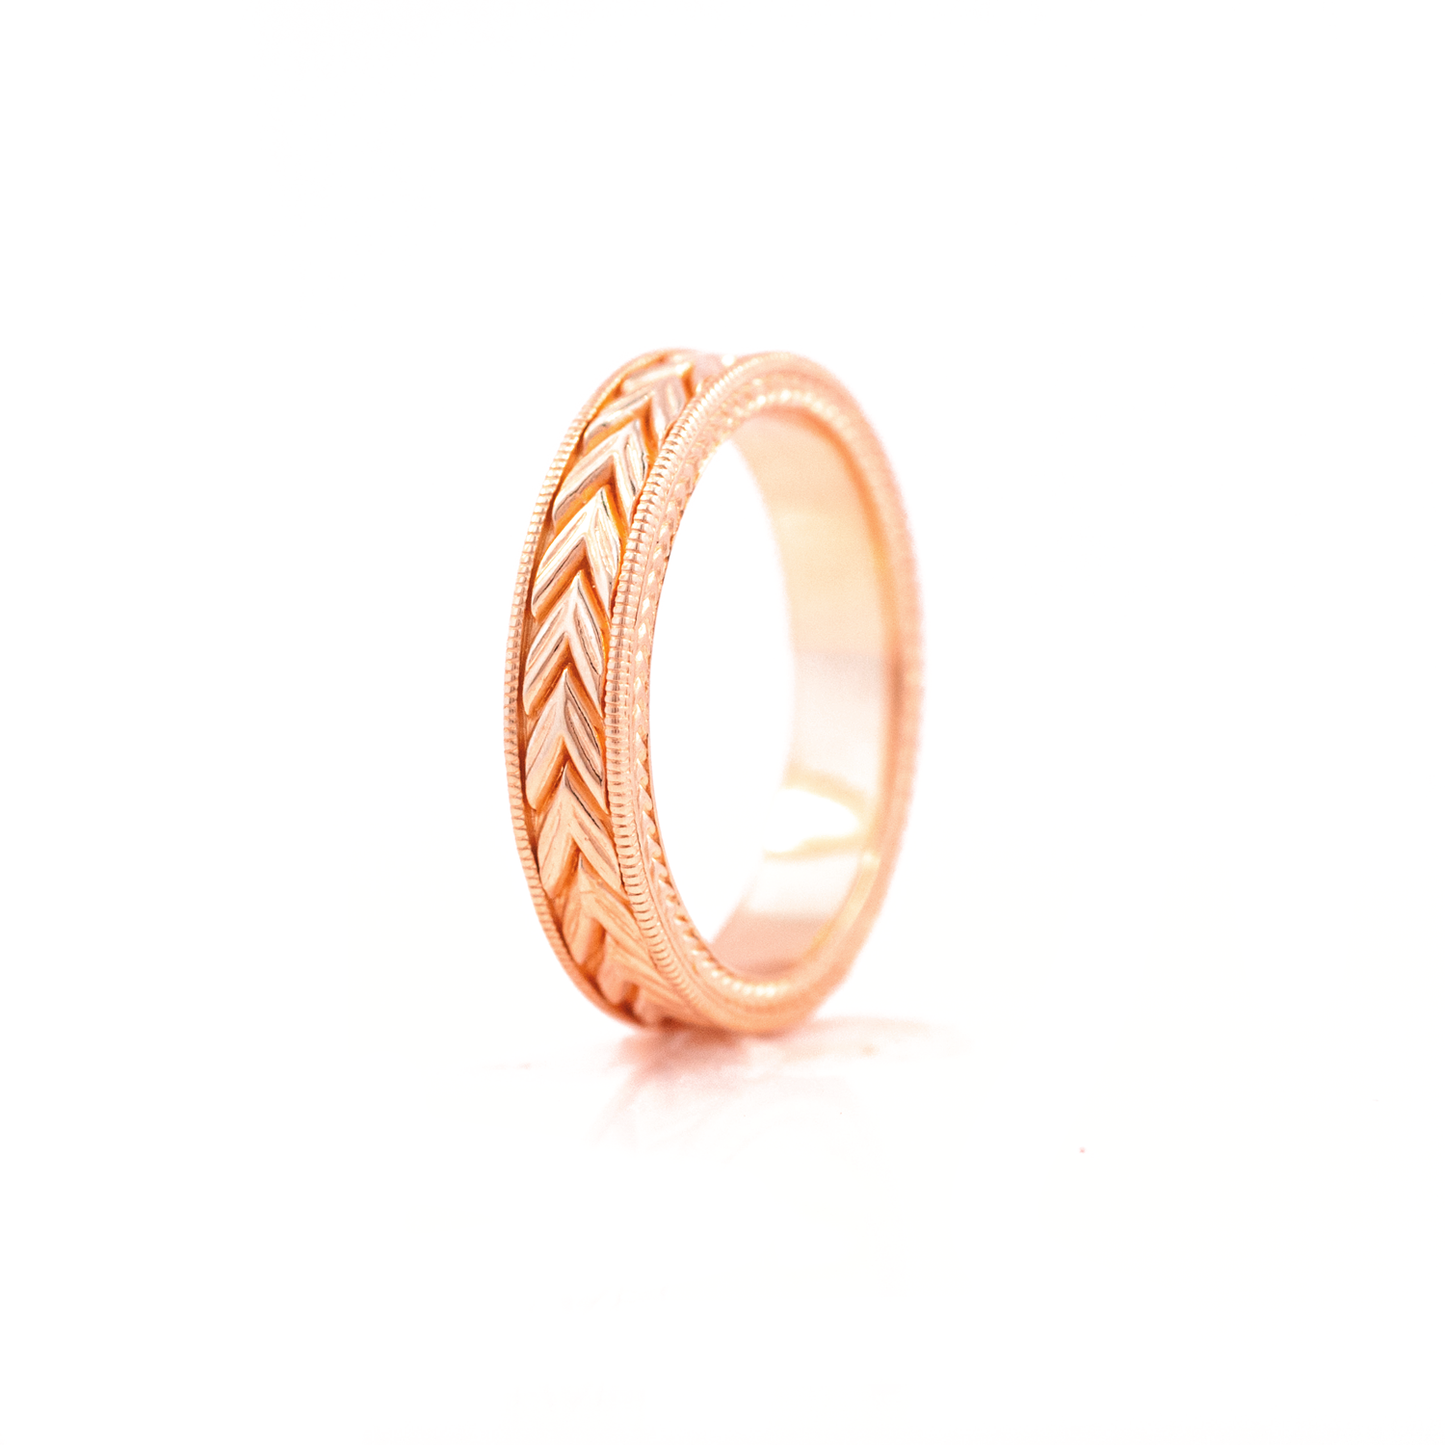 5mm Wheat Engraved Ring